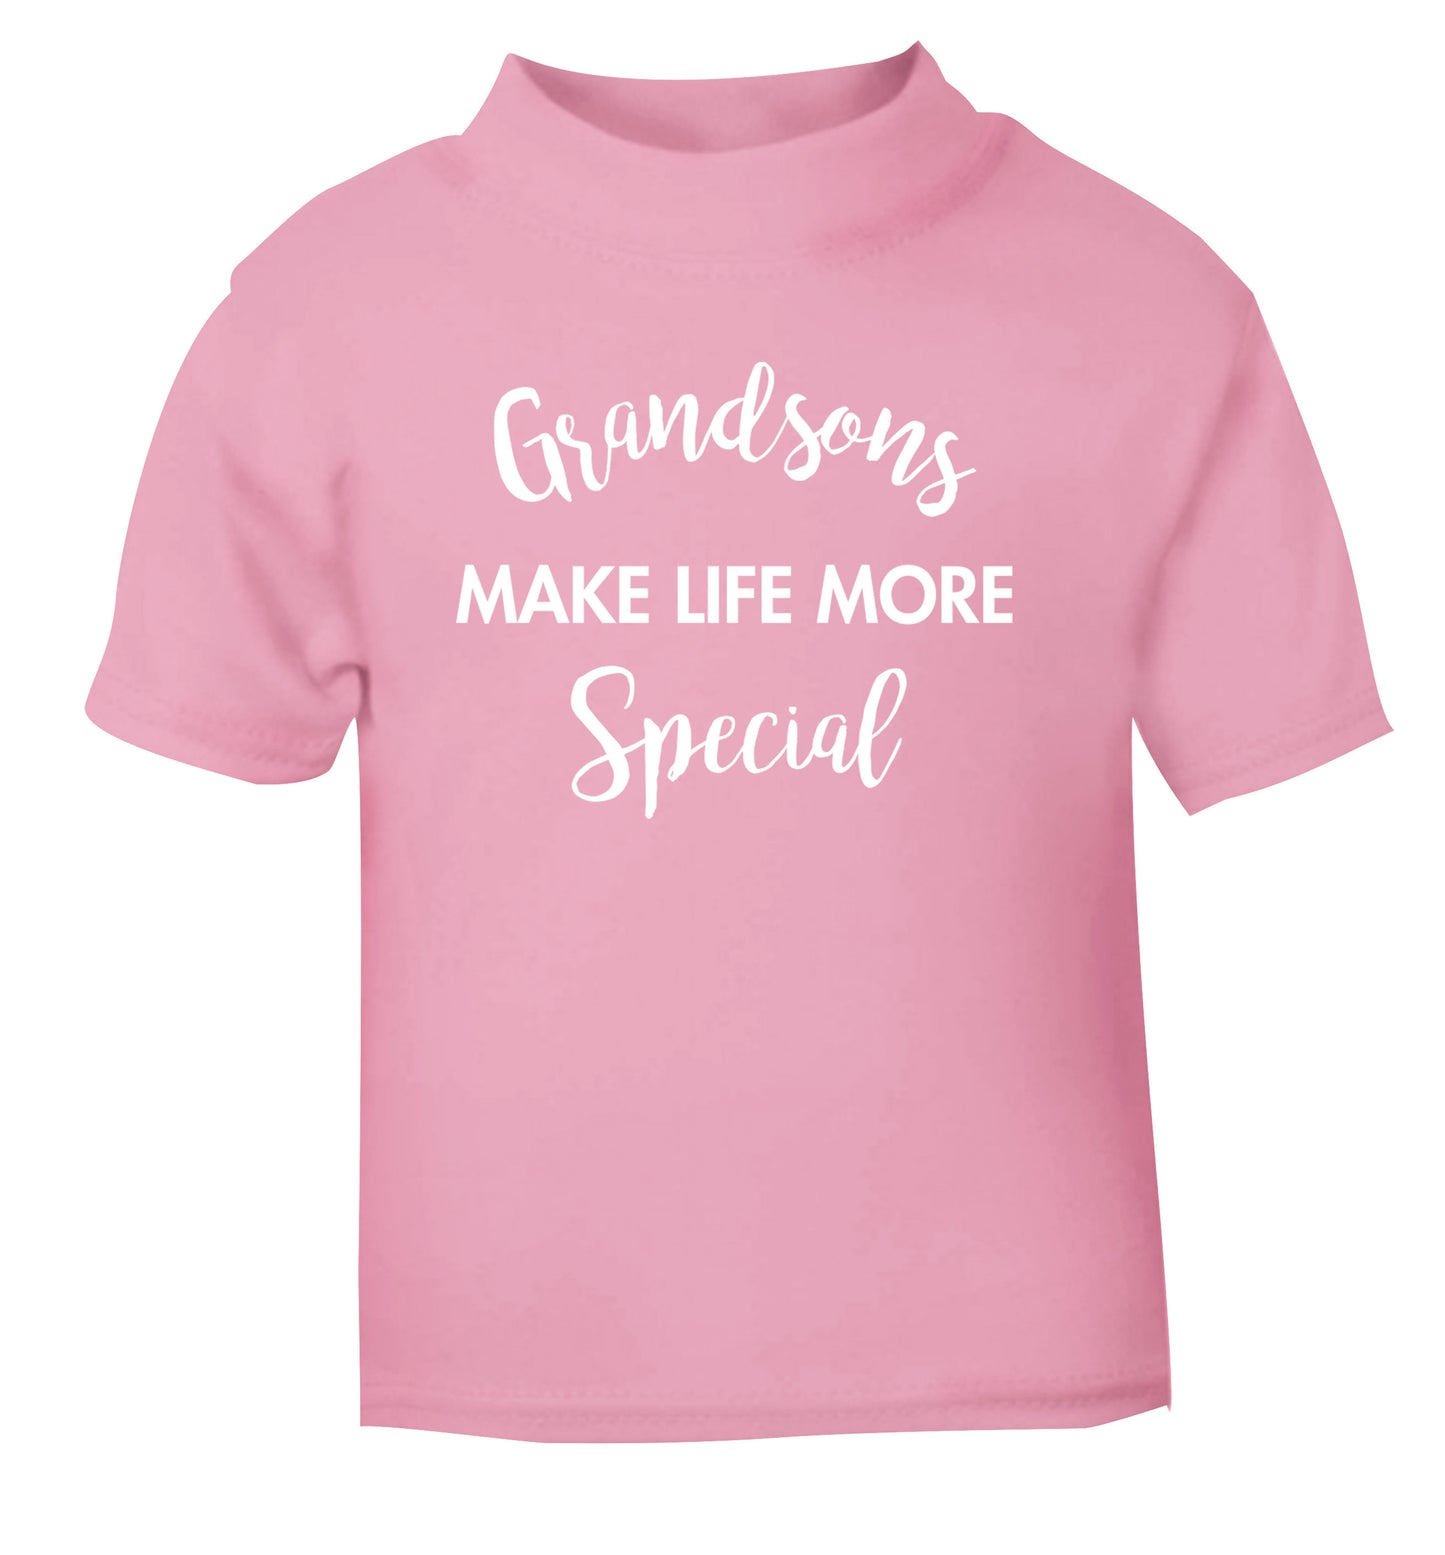 Grandsons make life more special light pink Baby Toddler Tshirt 2 Years